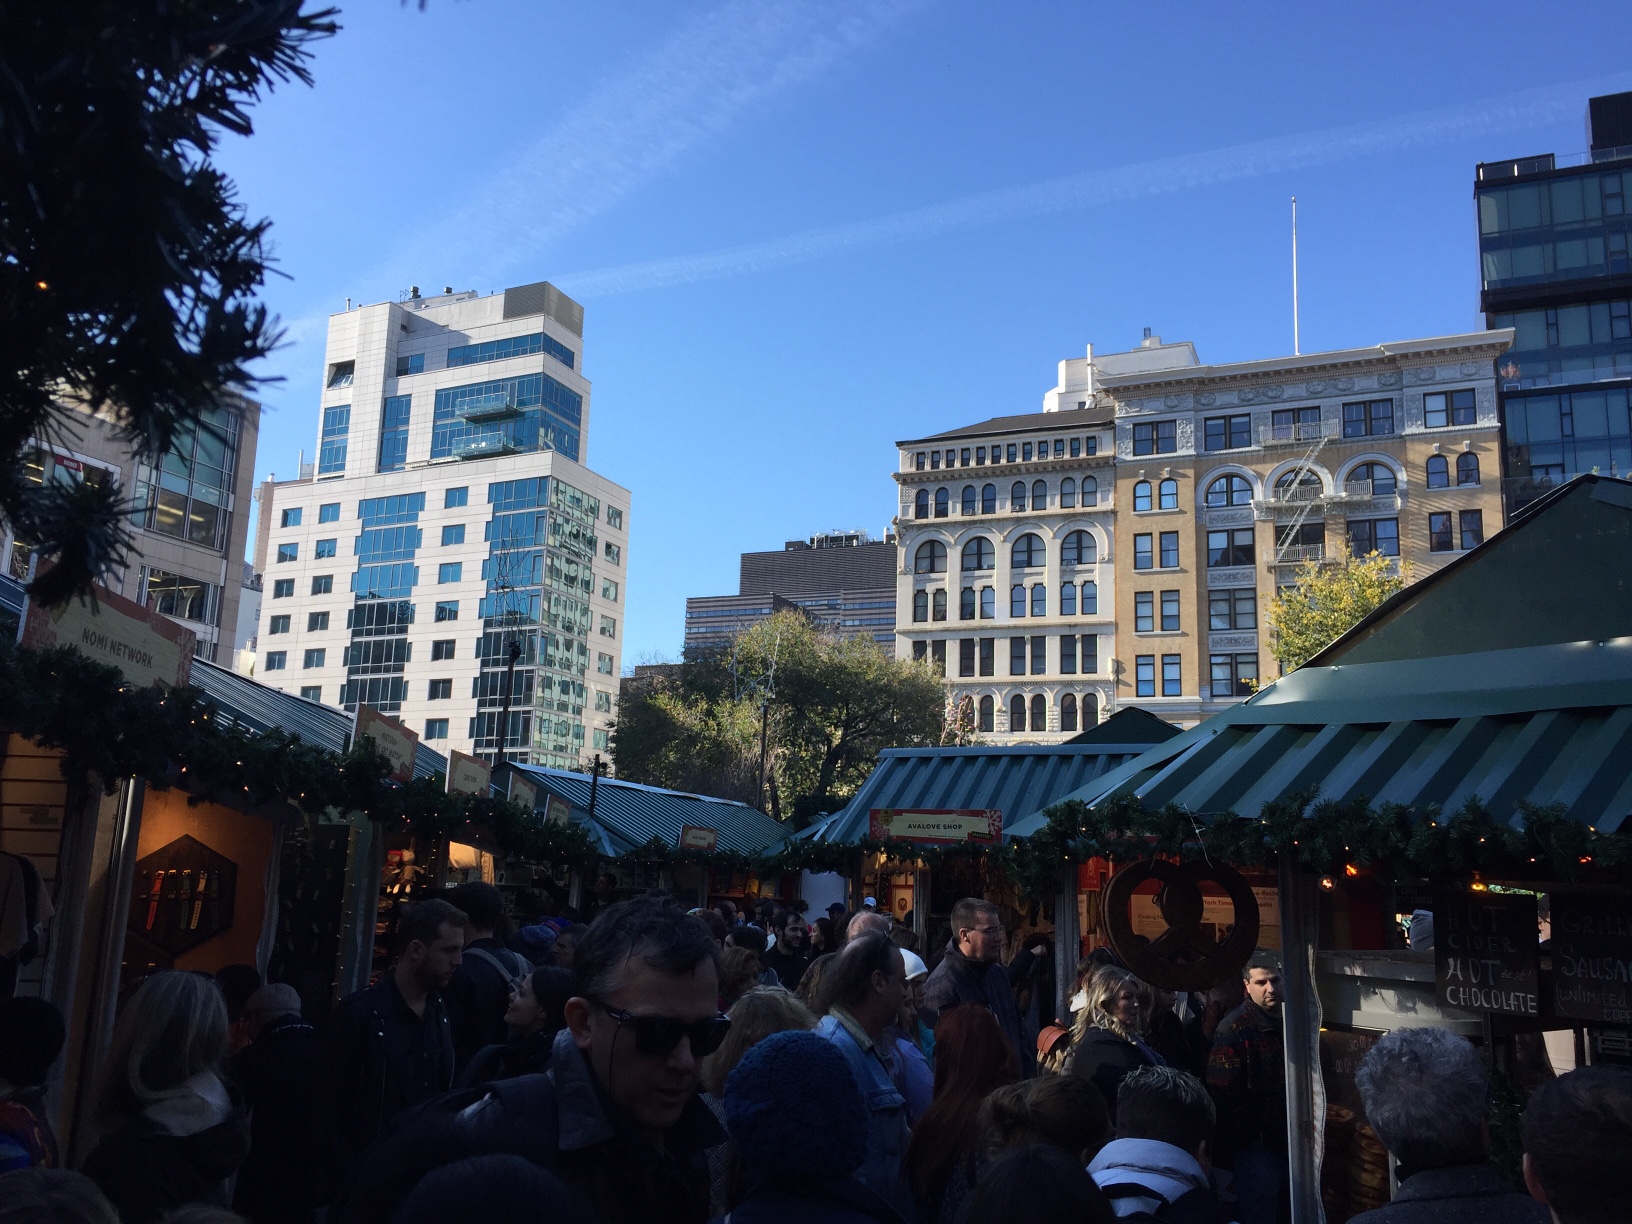 Union Square Holiday Market filled to the brim. (Photo by Stephen Fesler)